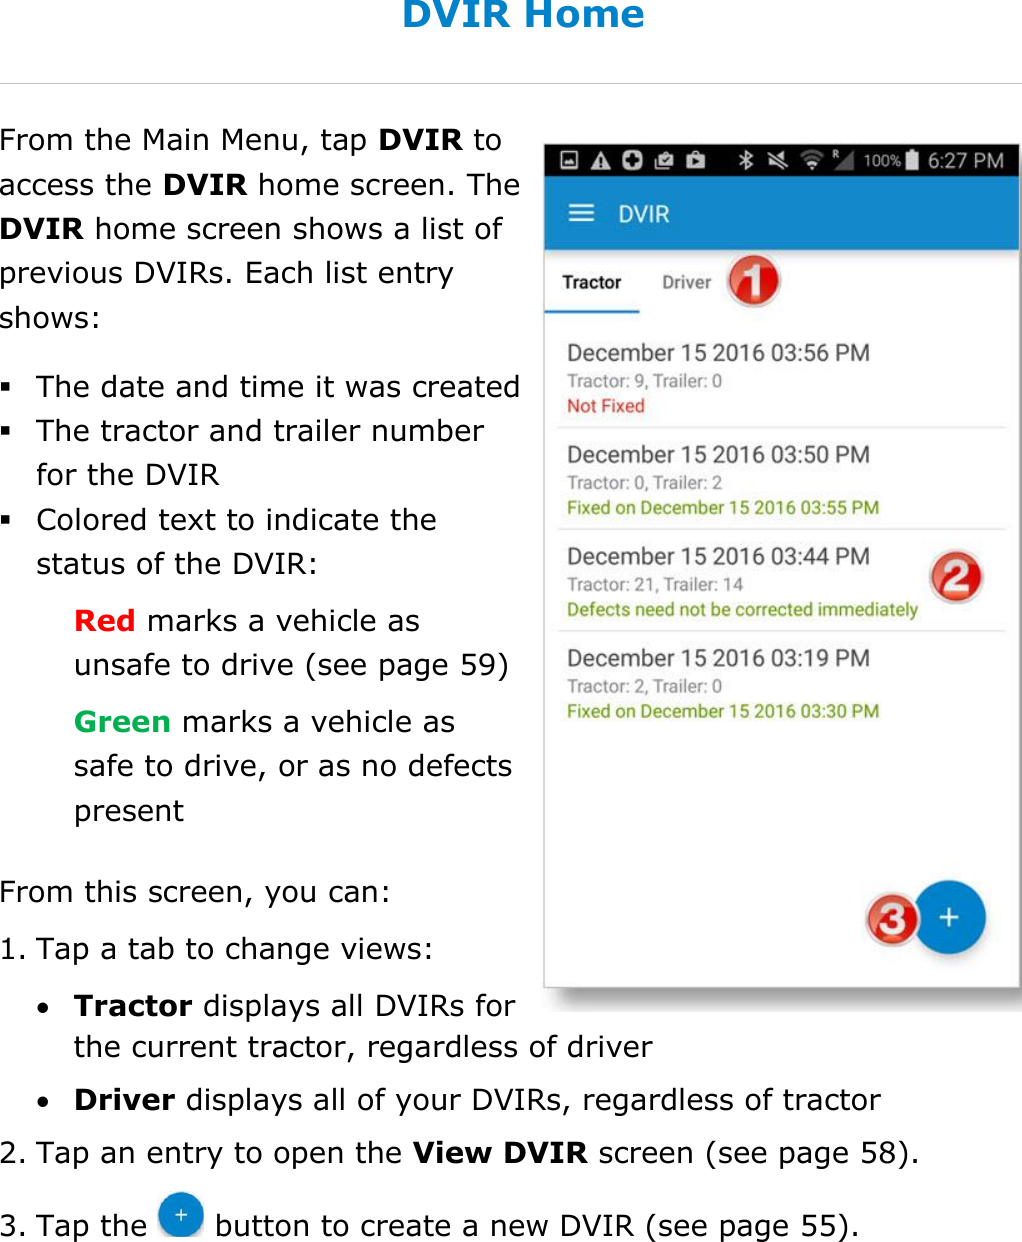 Complete a DVIR DriverConnect User Guide  54 © 2017, Rand McNally, Inc. DVIR Home From the Main Menu, tap DVIR to access the DVIR home screen. The DVIR home screen shows a list of previous DVIRs. Each list entry shows:  The date and time it was created  The tractor and trailer number for the DVIR  Colored text to indicate the status of the DVIR: Red marks a vehicle as unsafe to drive (see page 59) Green marks a vehicle as safe to drive, or as no defects present  From this screen, you can: 1. Tap a tab to change views:  Tractor displays all DVIRs for the current tractor, regardless of driver  Driver displays all of your DVIRs, regardless of tractor 2. Tap an entry to open the View DVIR screen (see page 58).  3. Tap the   button to create a new DVIR (see page 55).    